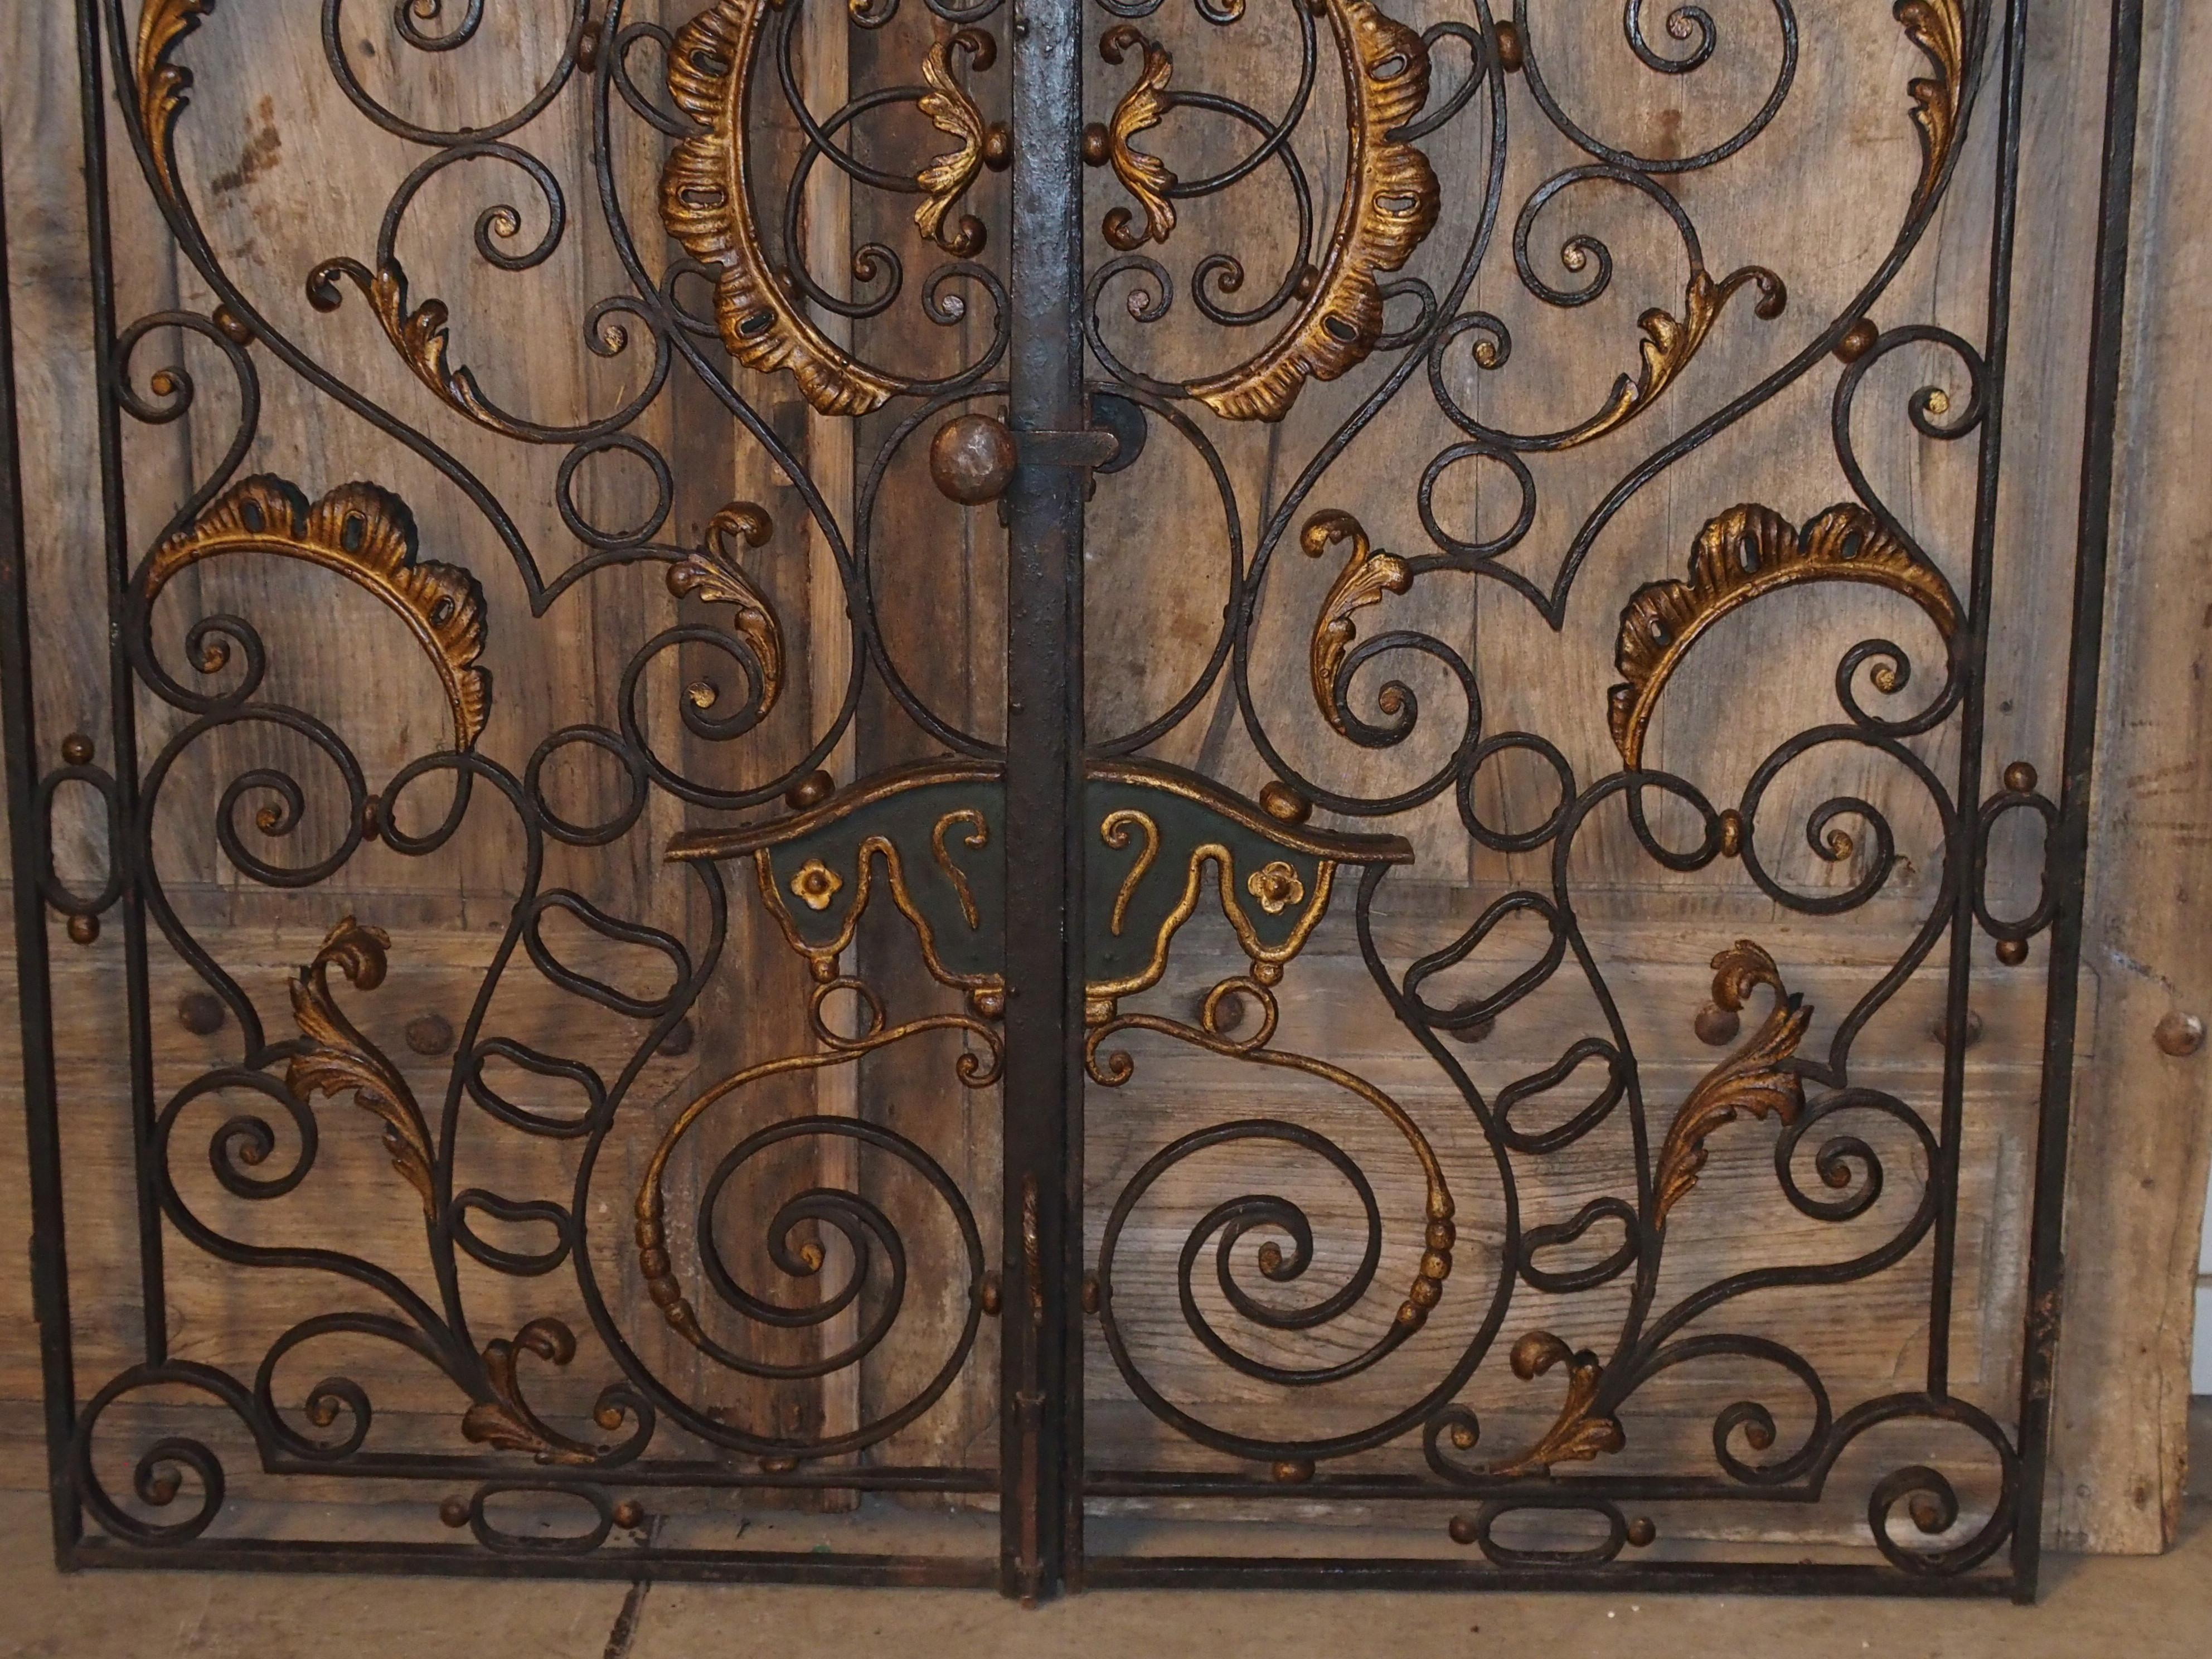 These fabulous gates are period Regence, circa 1715 and come from a chapel in Provence. They have beautiful double-sided decorative motifs in gilt tole, green laquer and paint. Forged C and S-scrolls along with acanthus leaf motifs are seen